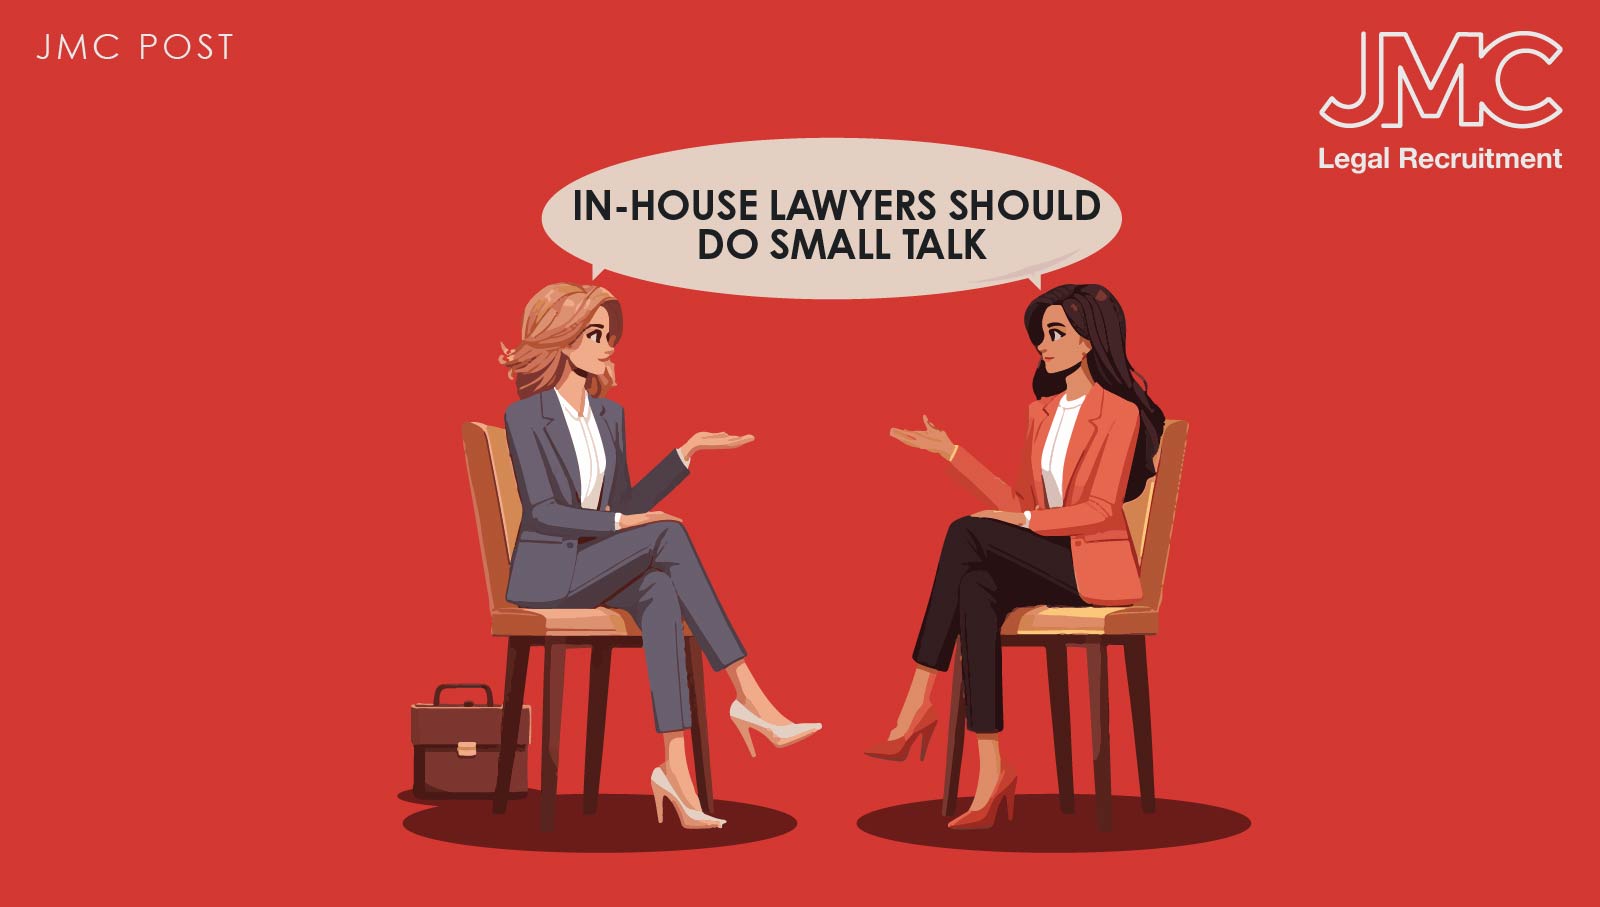 In-house lawyers should do small talk